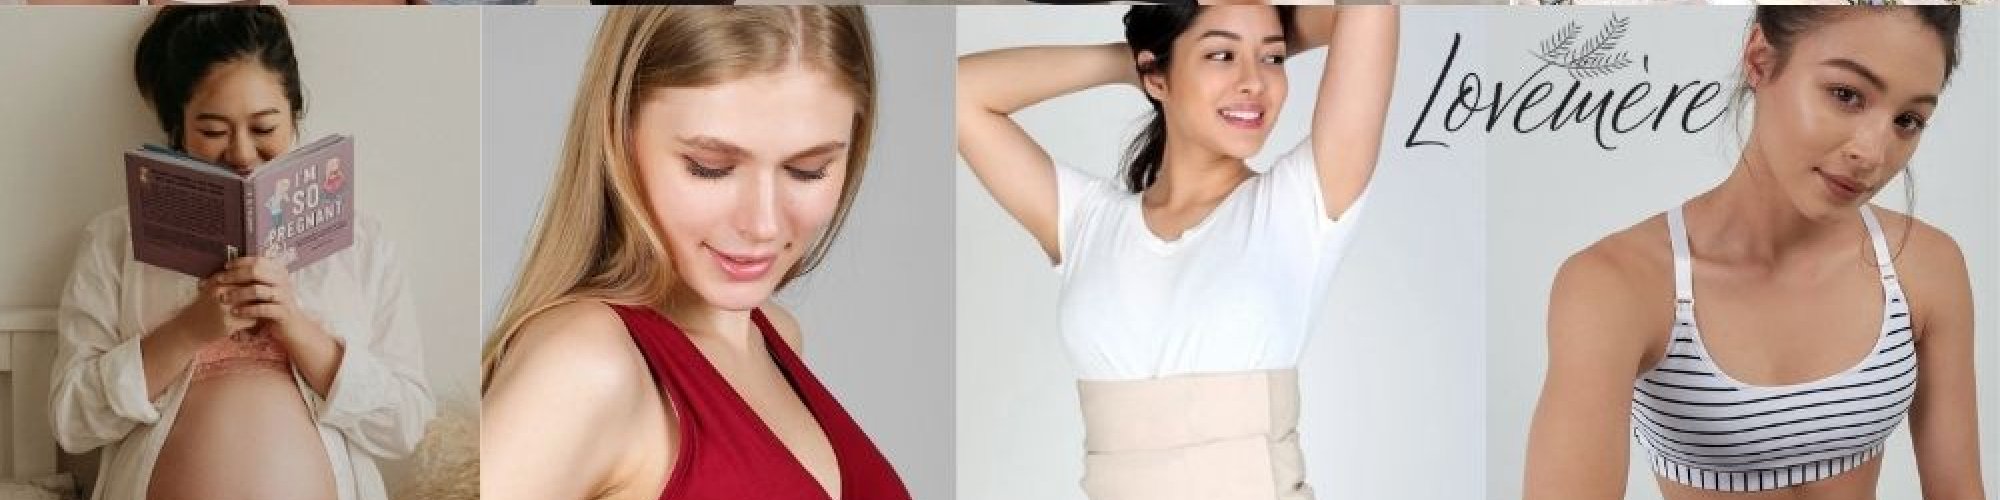 https://www.startus.cc/sites/default/files/styles/company_profile_cover_crop/public/get_beautiful_maternity_clothes_for_pregnant_womens_in_singapore.jpg?itok=R5QVzmsI&sc=1f6aebe9b2e93d06fafe37597699f394